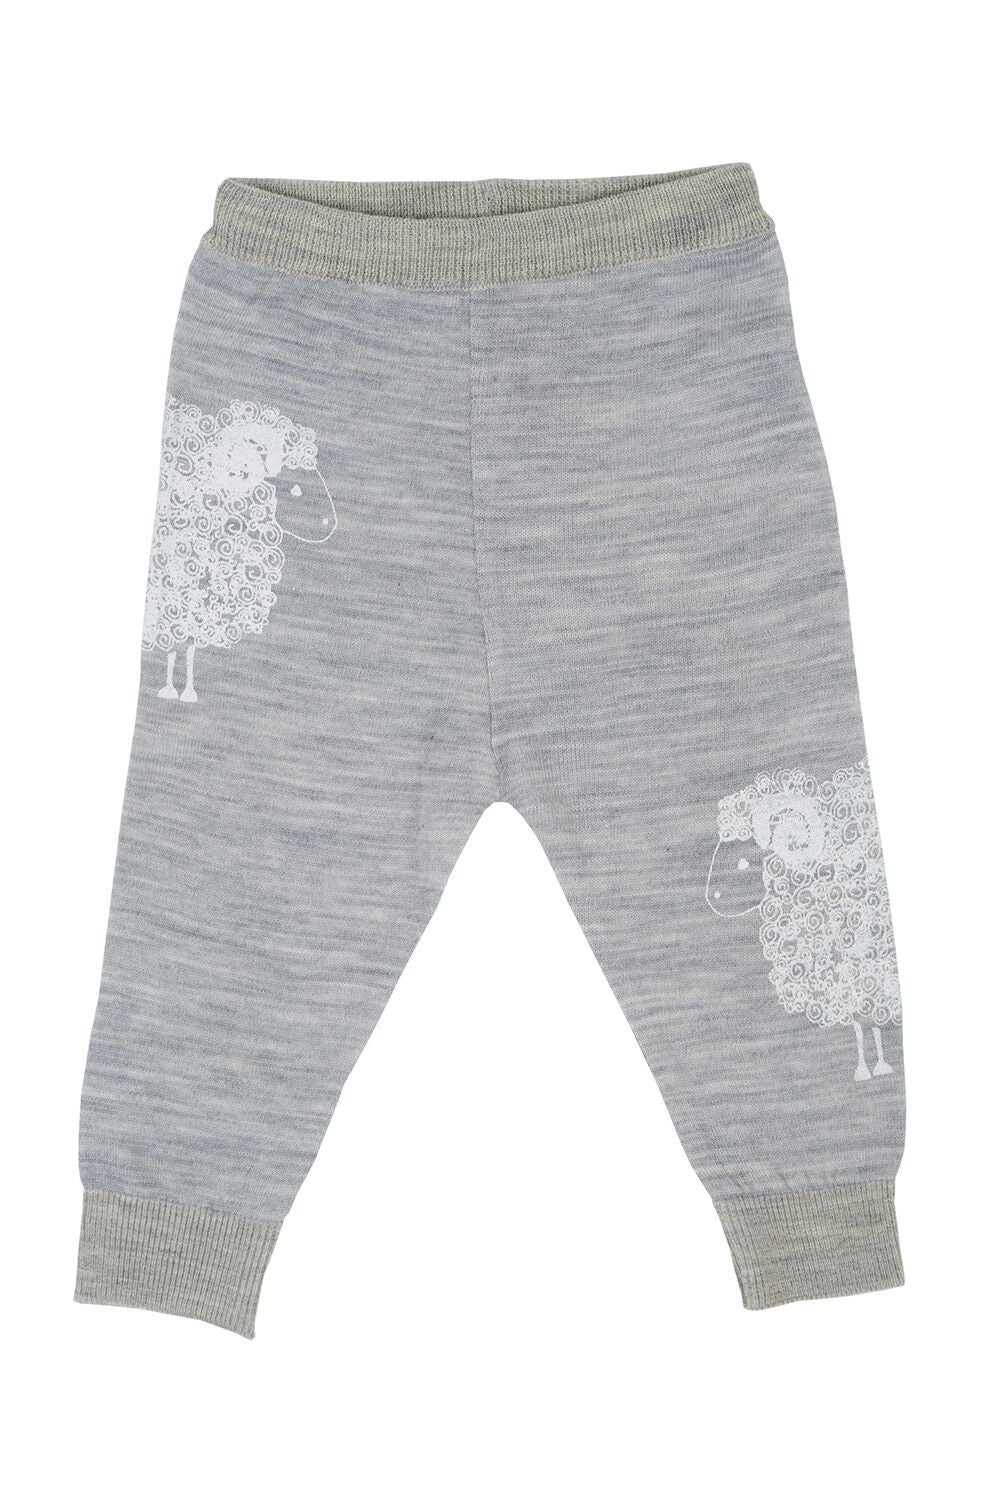 Merino Kids - Leggings https://babystuff.co.nz/products/merino-kids-leggings These 100% merino leggings are a fabulous addition to any child's wardrobe! These slim fit leggings have an elasticized waistband and perfect for layering. Wear by themselves, with a skirt, or paired with the hoodie for a classic look.